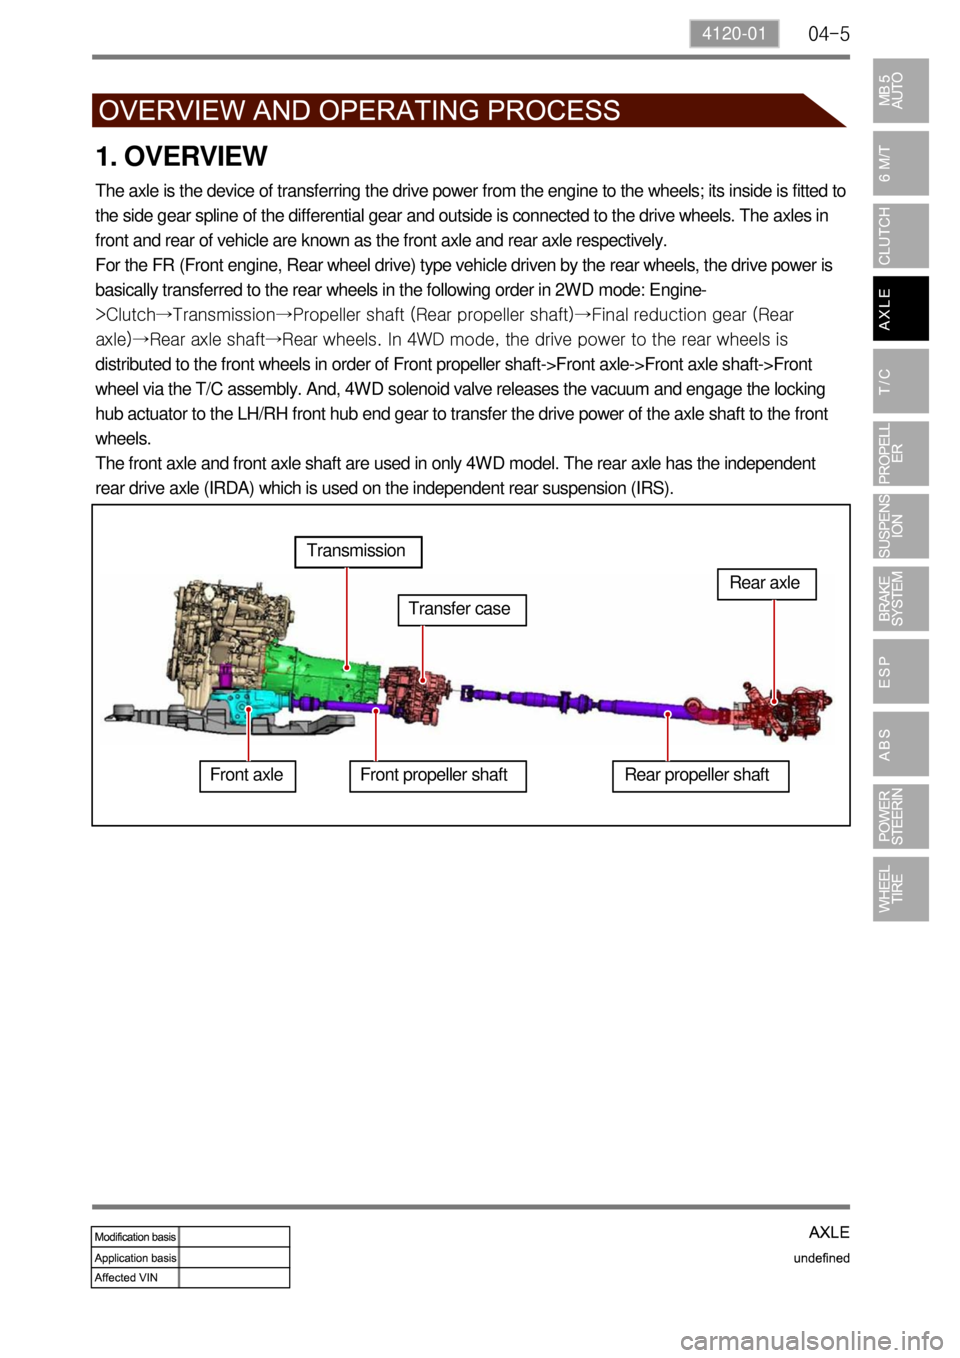 SSANGYONG TURISMO 2013  Service Manual 04-54120-01
1. OVERVIEW
The axle is the device of transferring the drive power from the engine to the wheels; its inside is fitted to 
the side gear spline of the differential gear and outside is conn